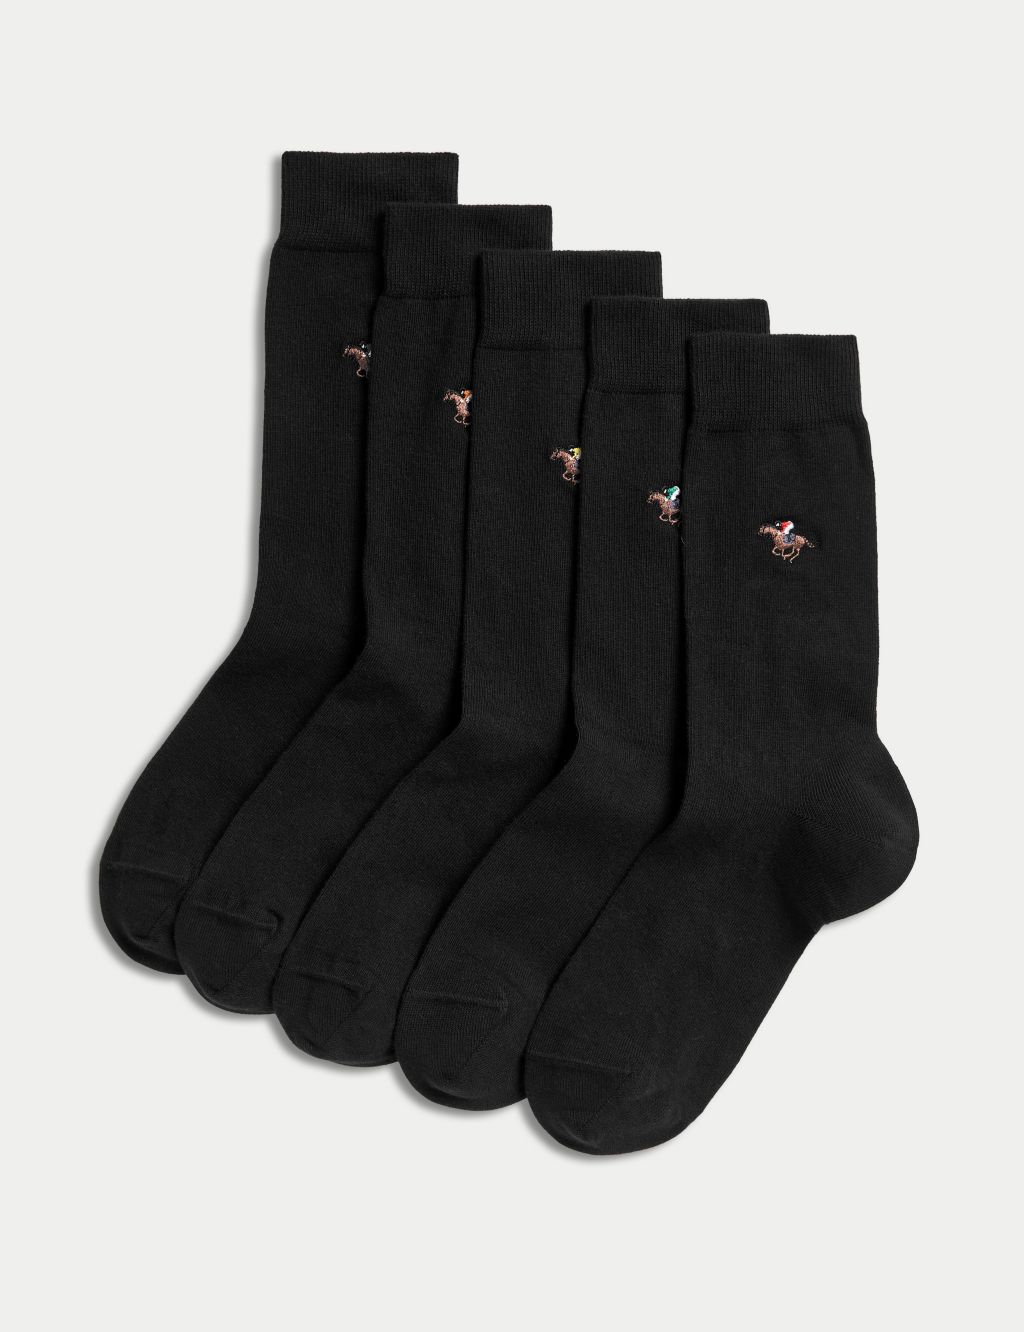 M&S menswear essentials - new underwear and socks from Marks & Spencer  Autograph collection — The Rakish Gent